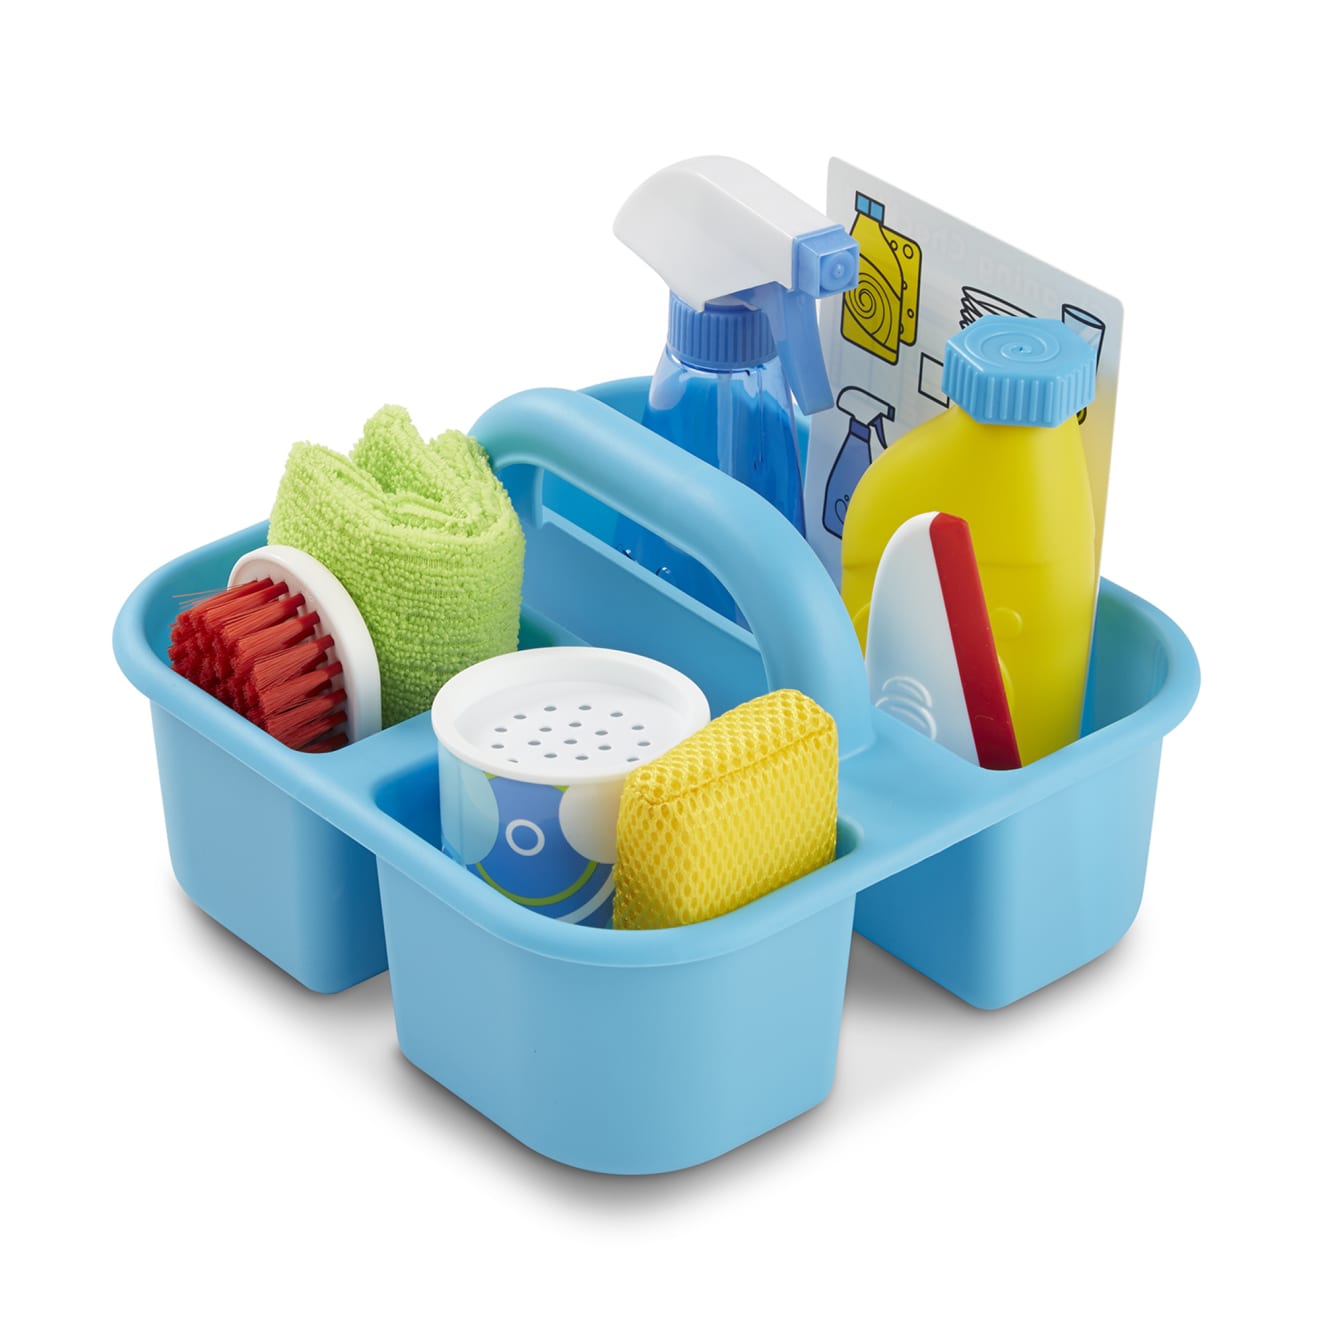 House Cleaning Kit - Play with a Purpose